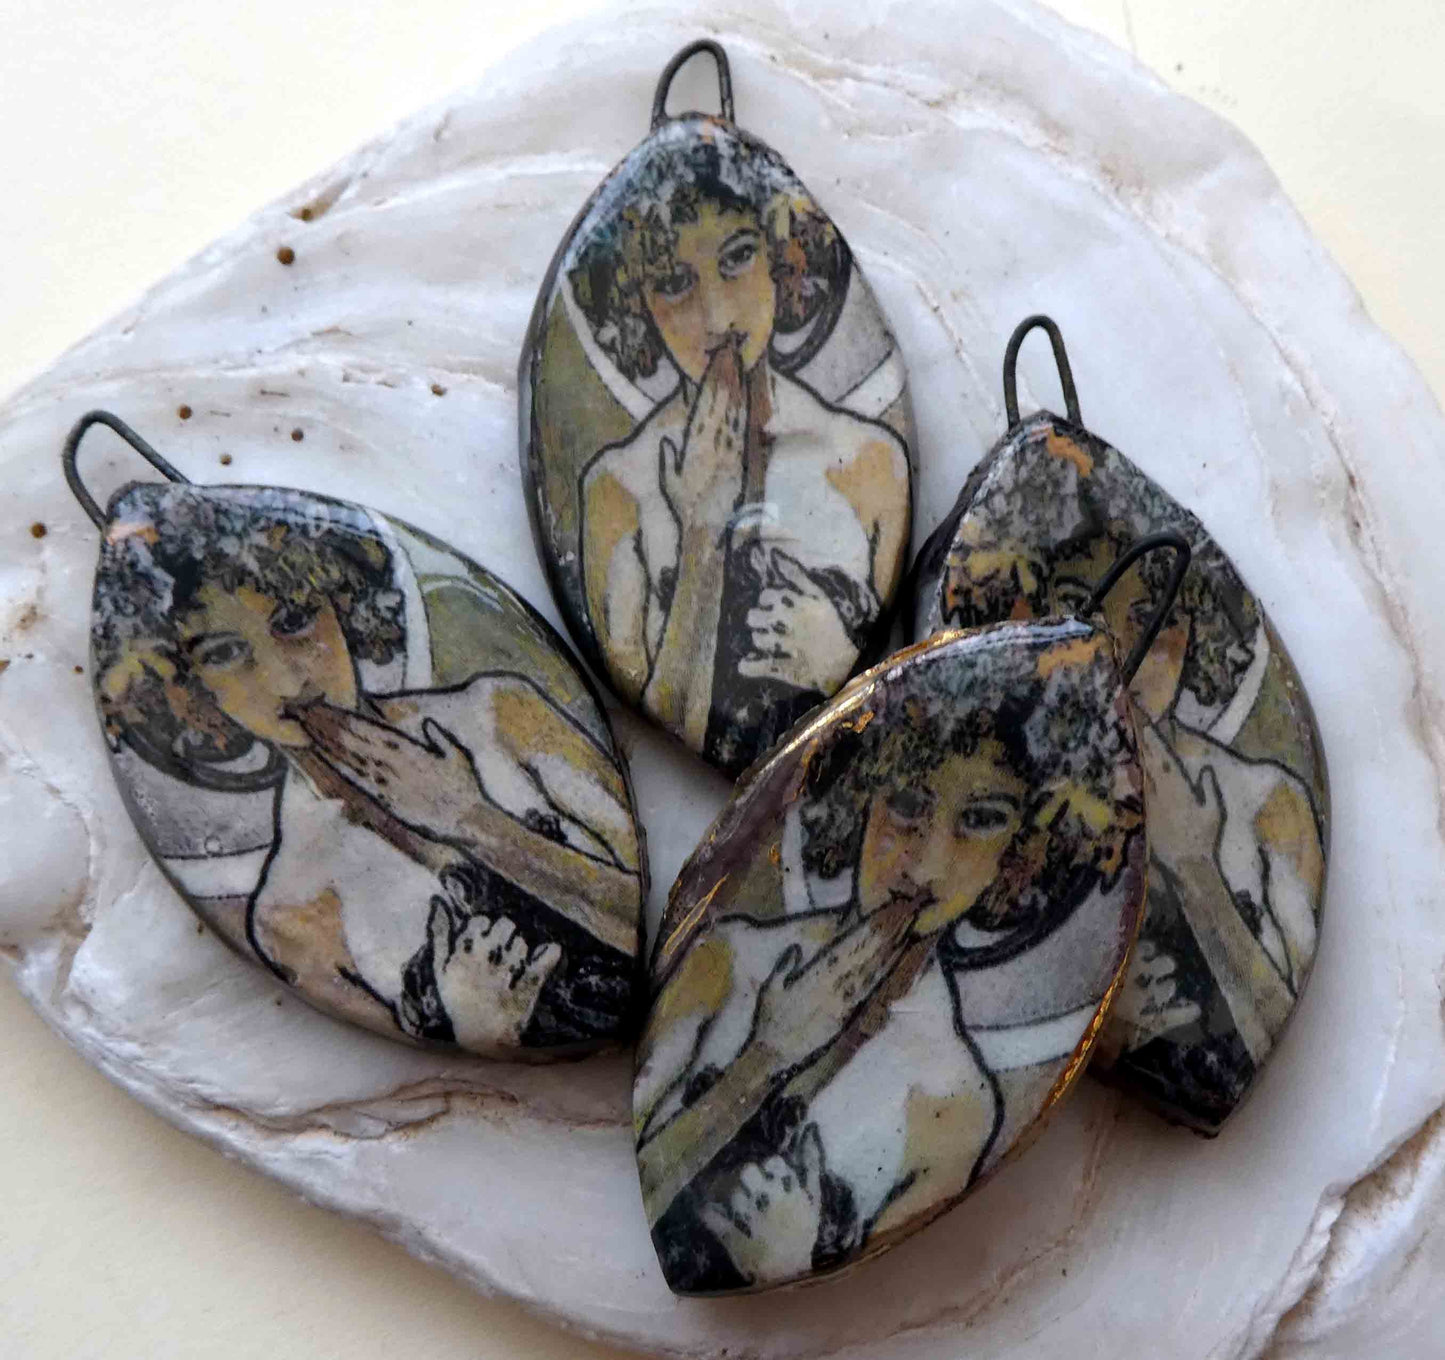 Ceramic Decal Mucha Earring Droppers #22